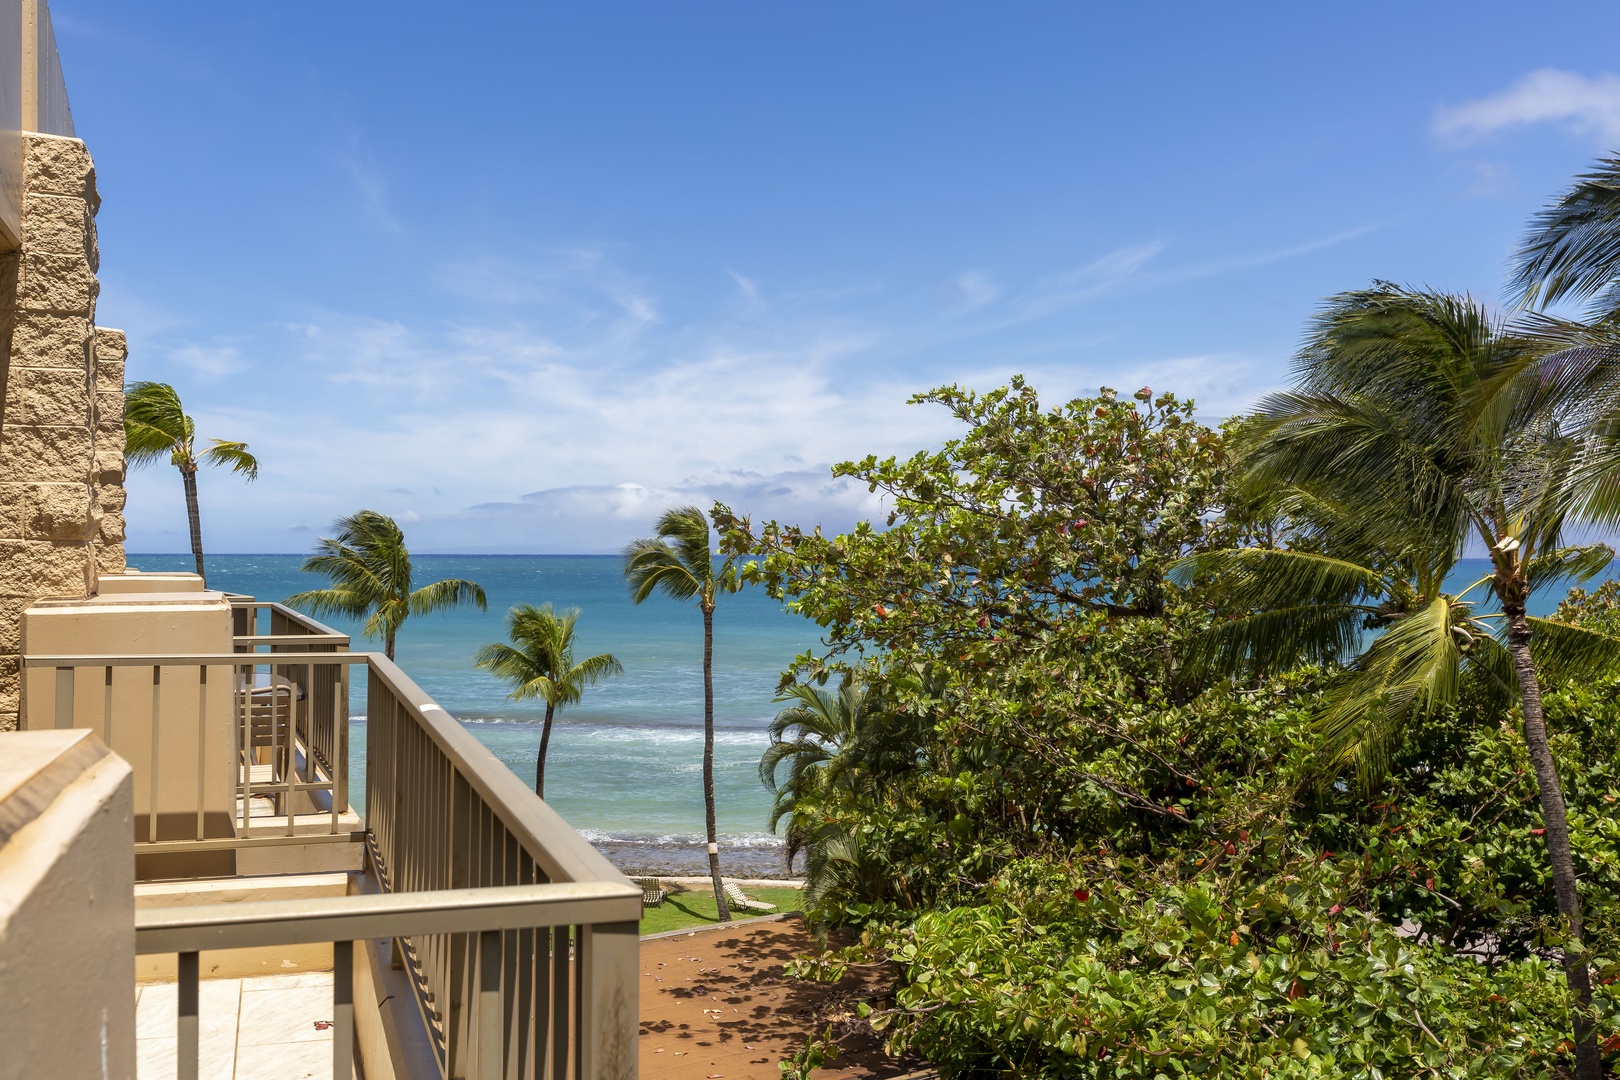 More ocean views from your lanai